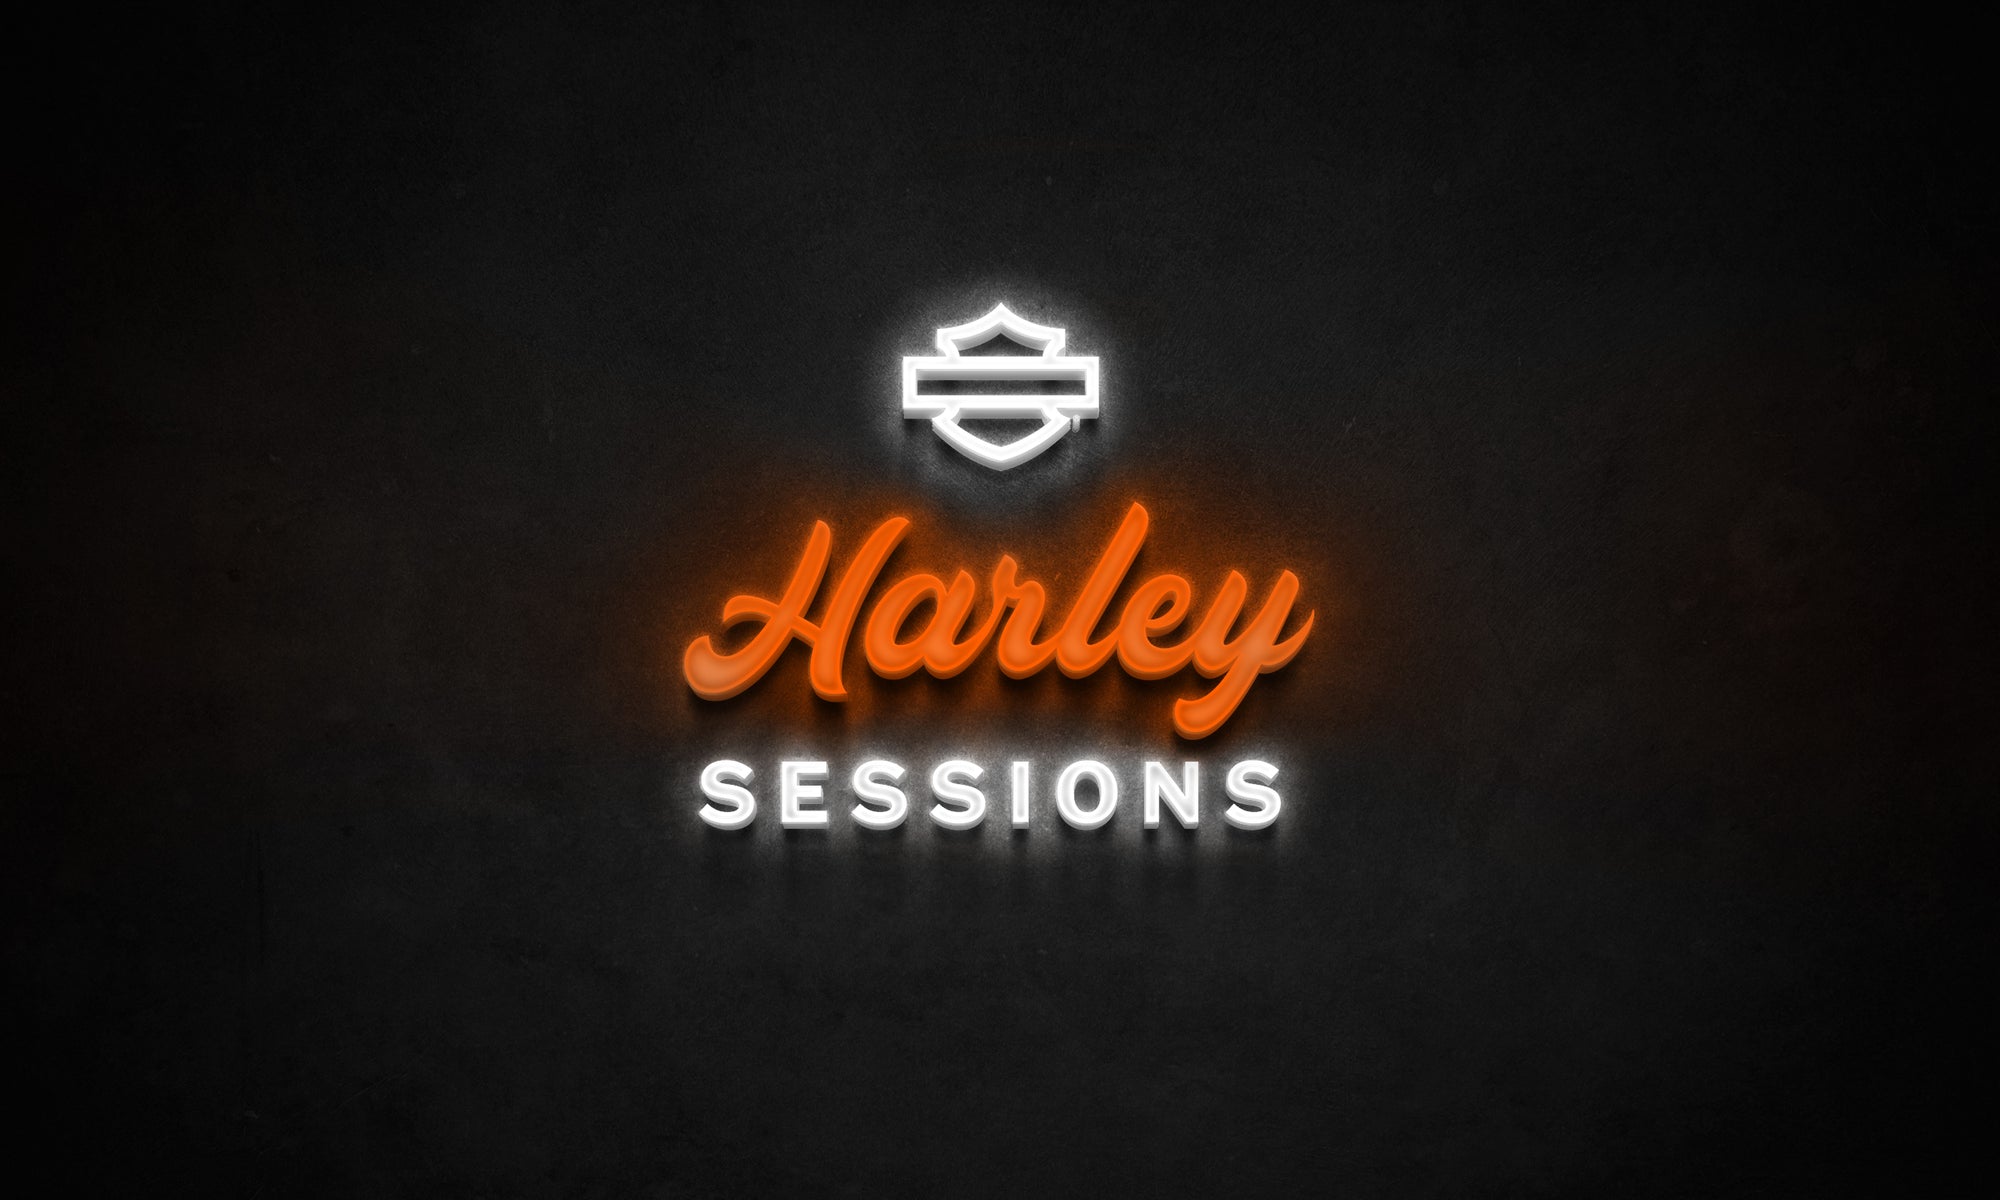 Harley Sessions